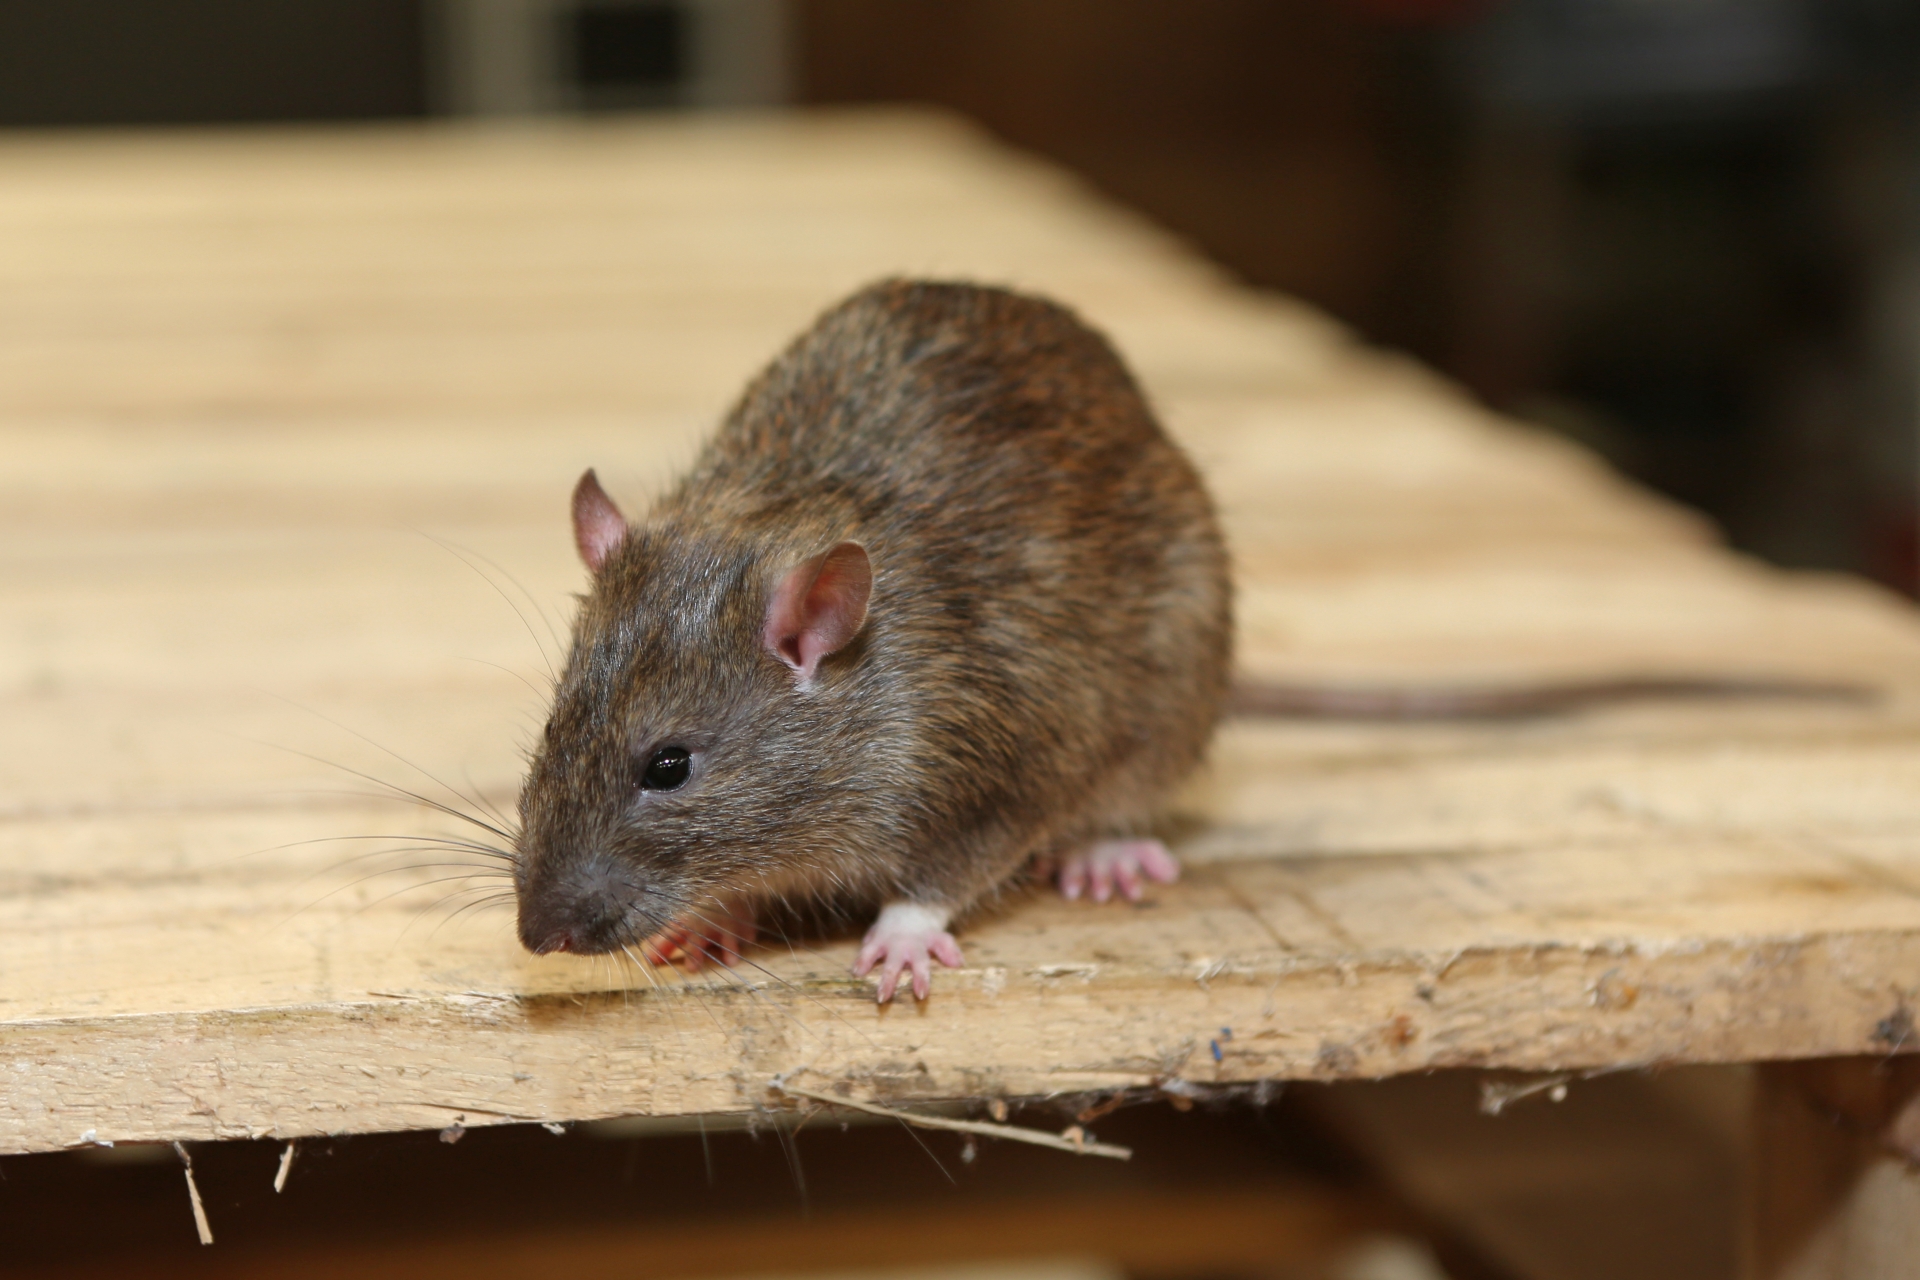 Rat extermination, Pest Control in Finchley Central, N3. Call Now 020 8166 9746